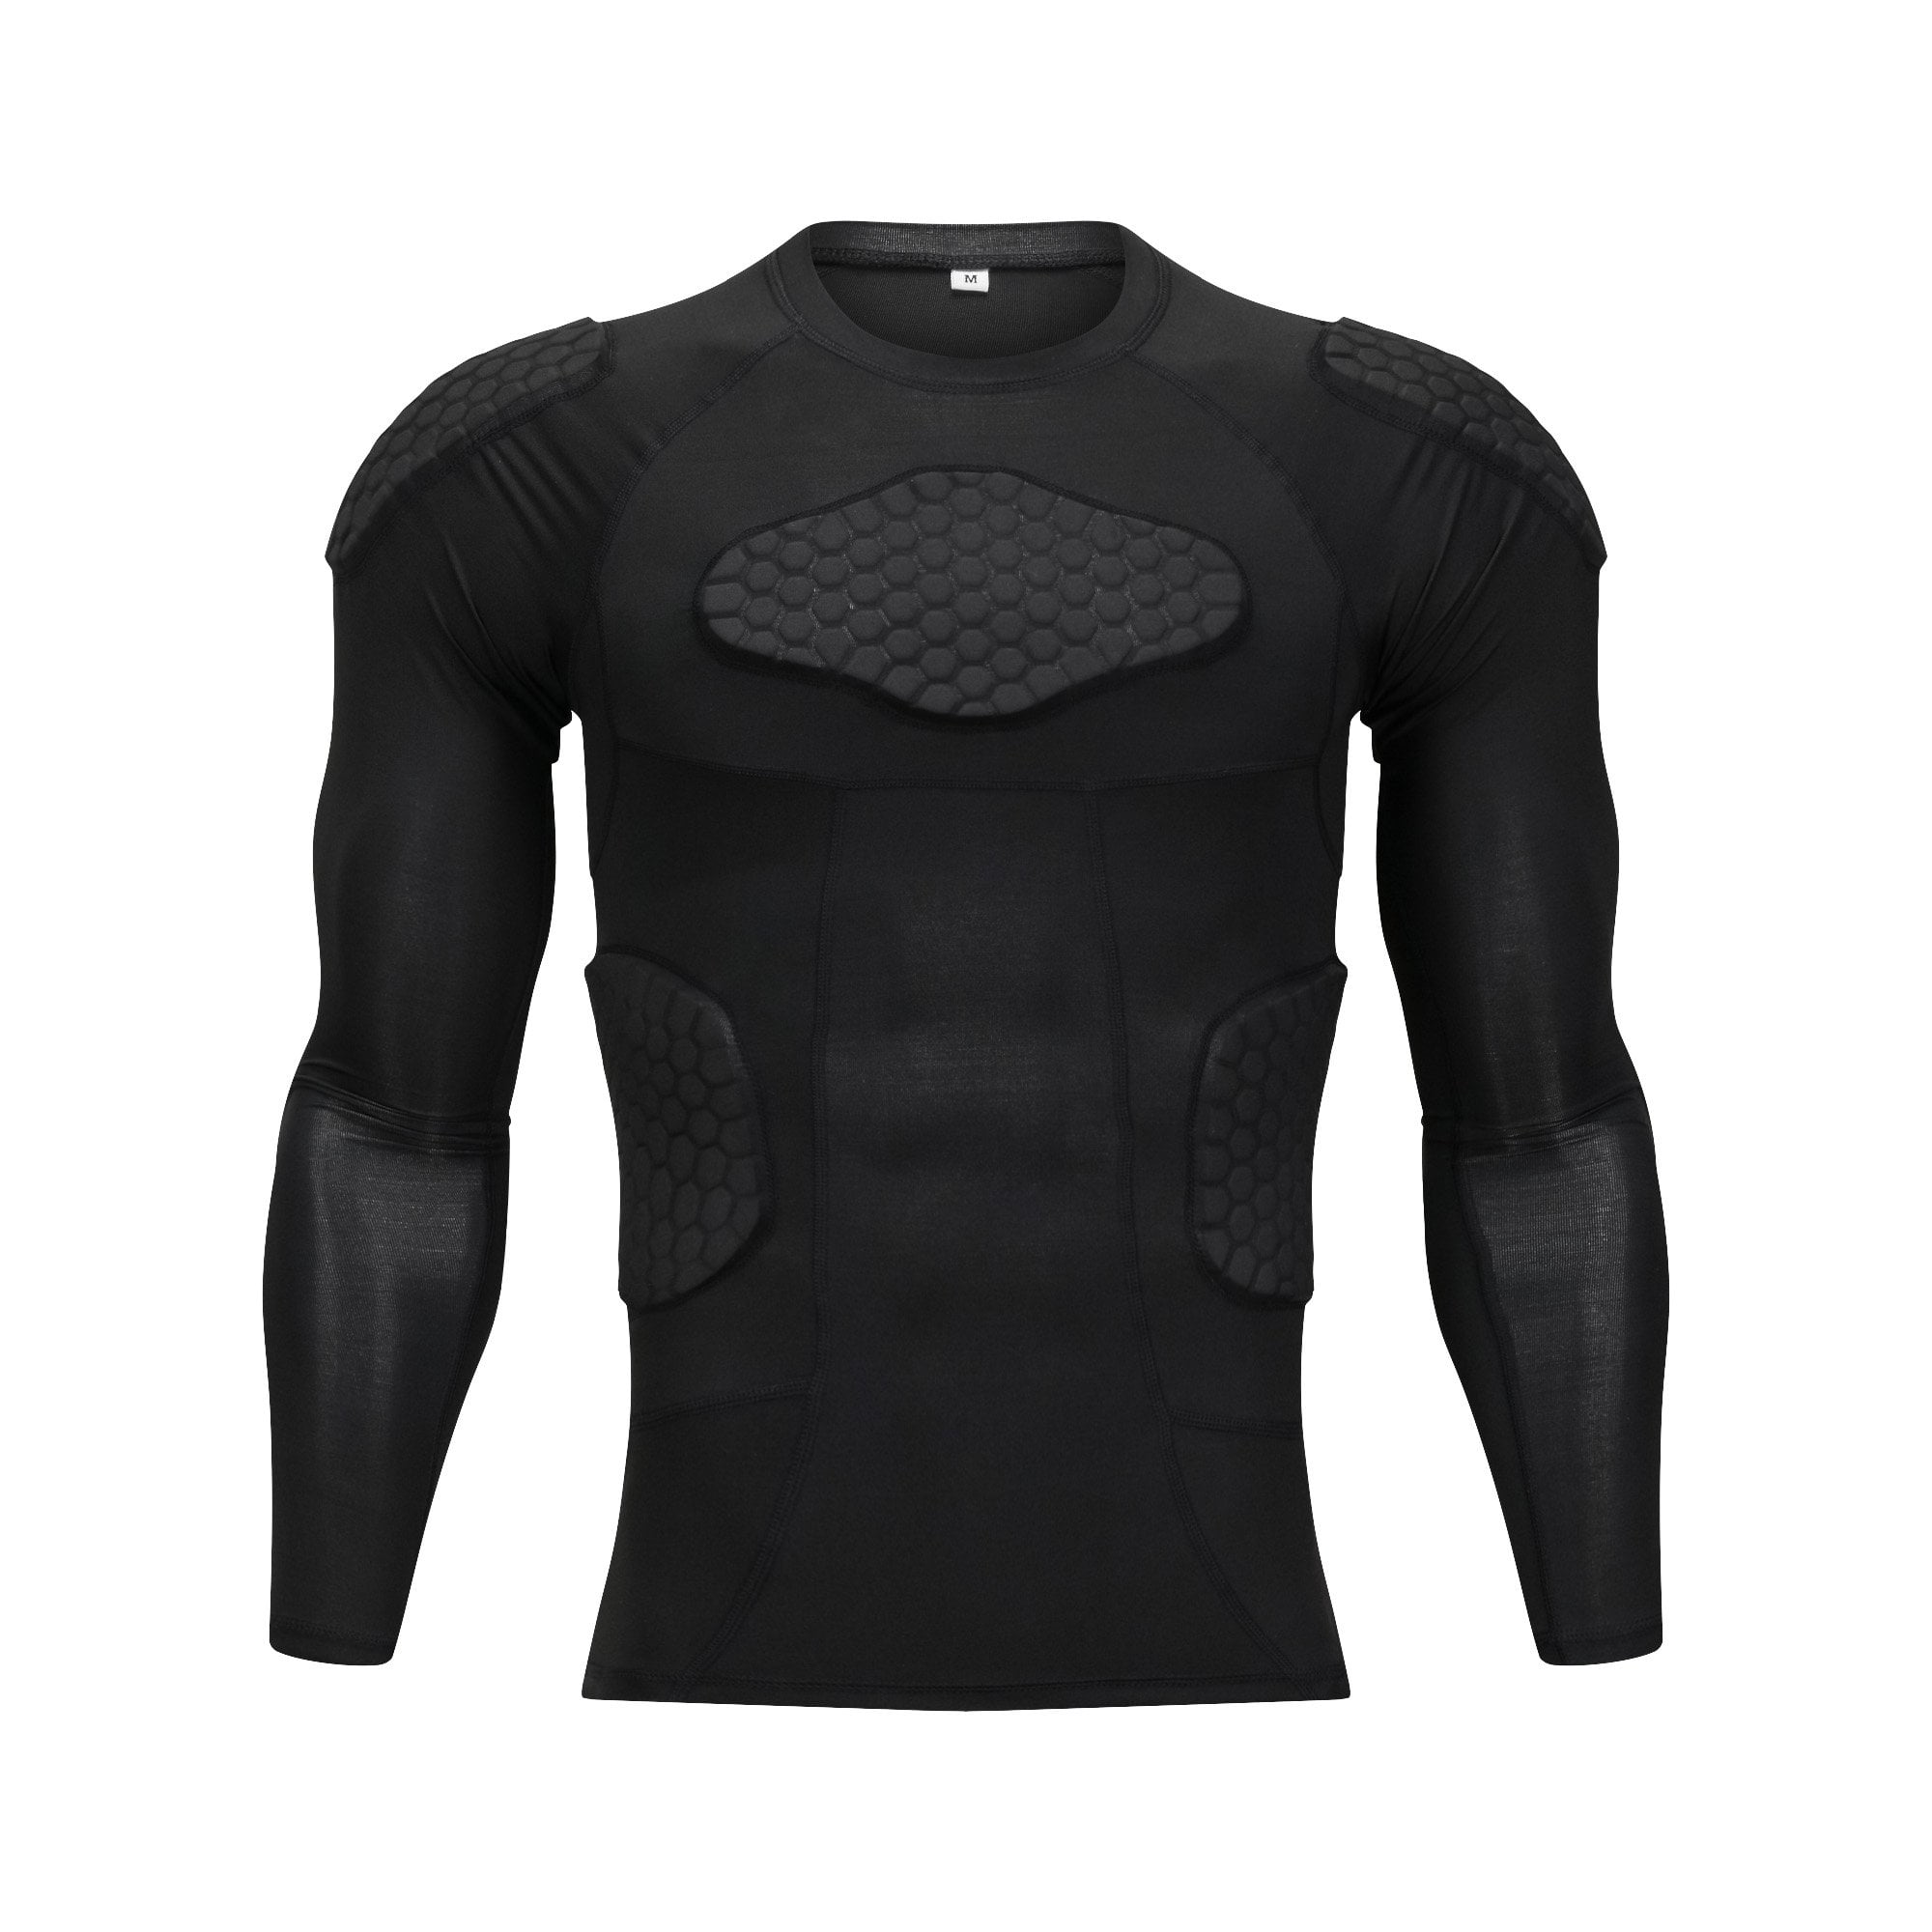 PADDED SHIRT Chest Shoulder Collarbone Protection Flag Football Rugby Base Layer 